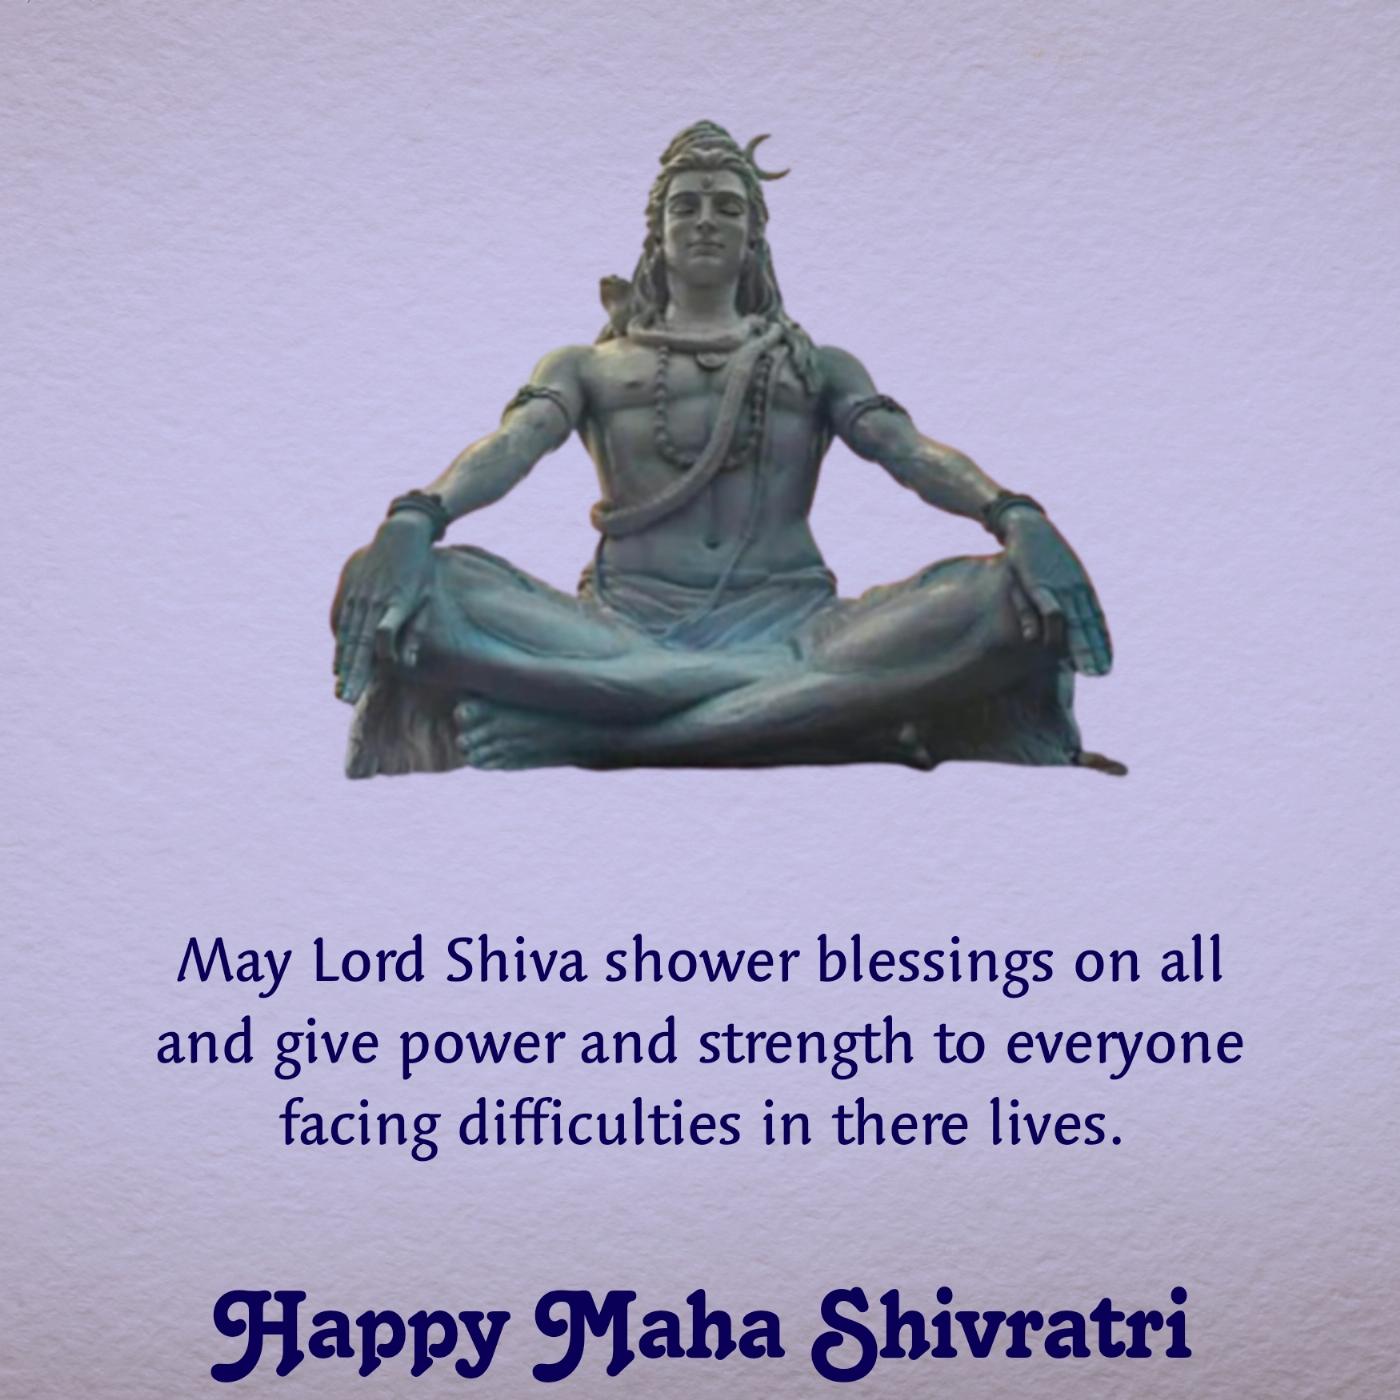 May Lord Shiva shower blessings on all and give power and strength